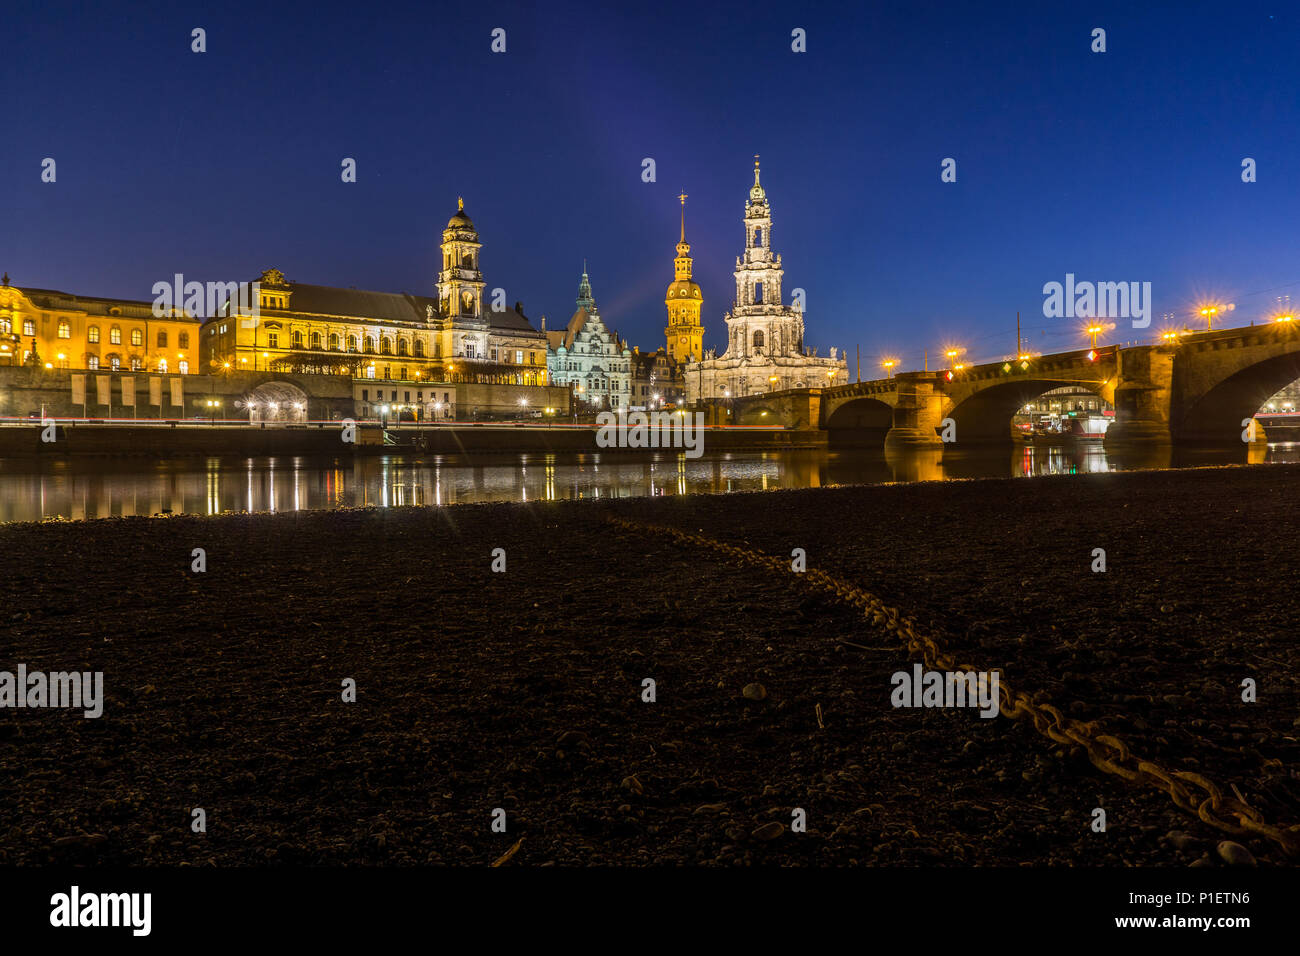 Dresden, the capital of the Federal State of Saxony, is distinguished by its renowned art museums and the classical architecture of the reconstructed  Stock Photo